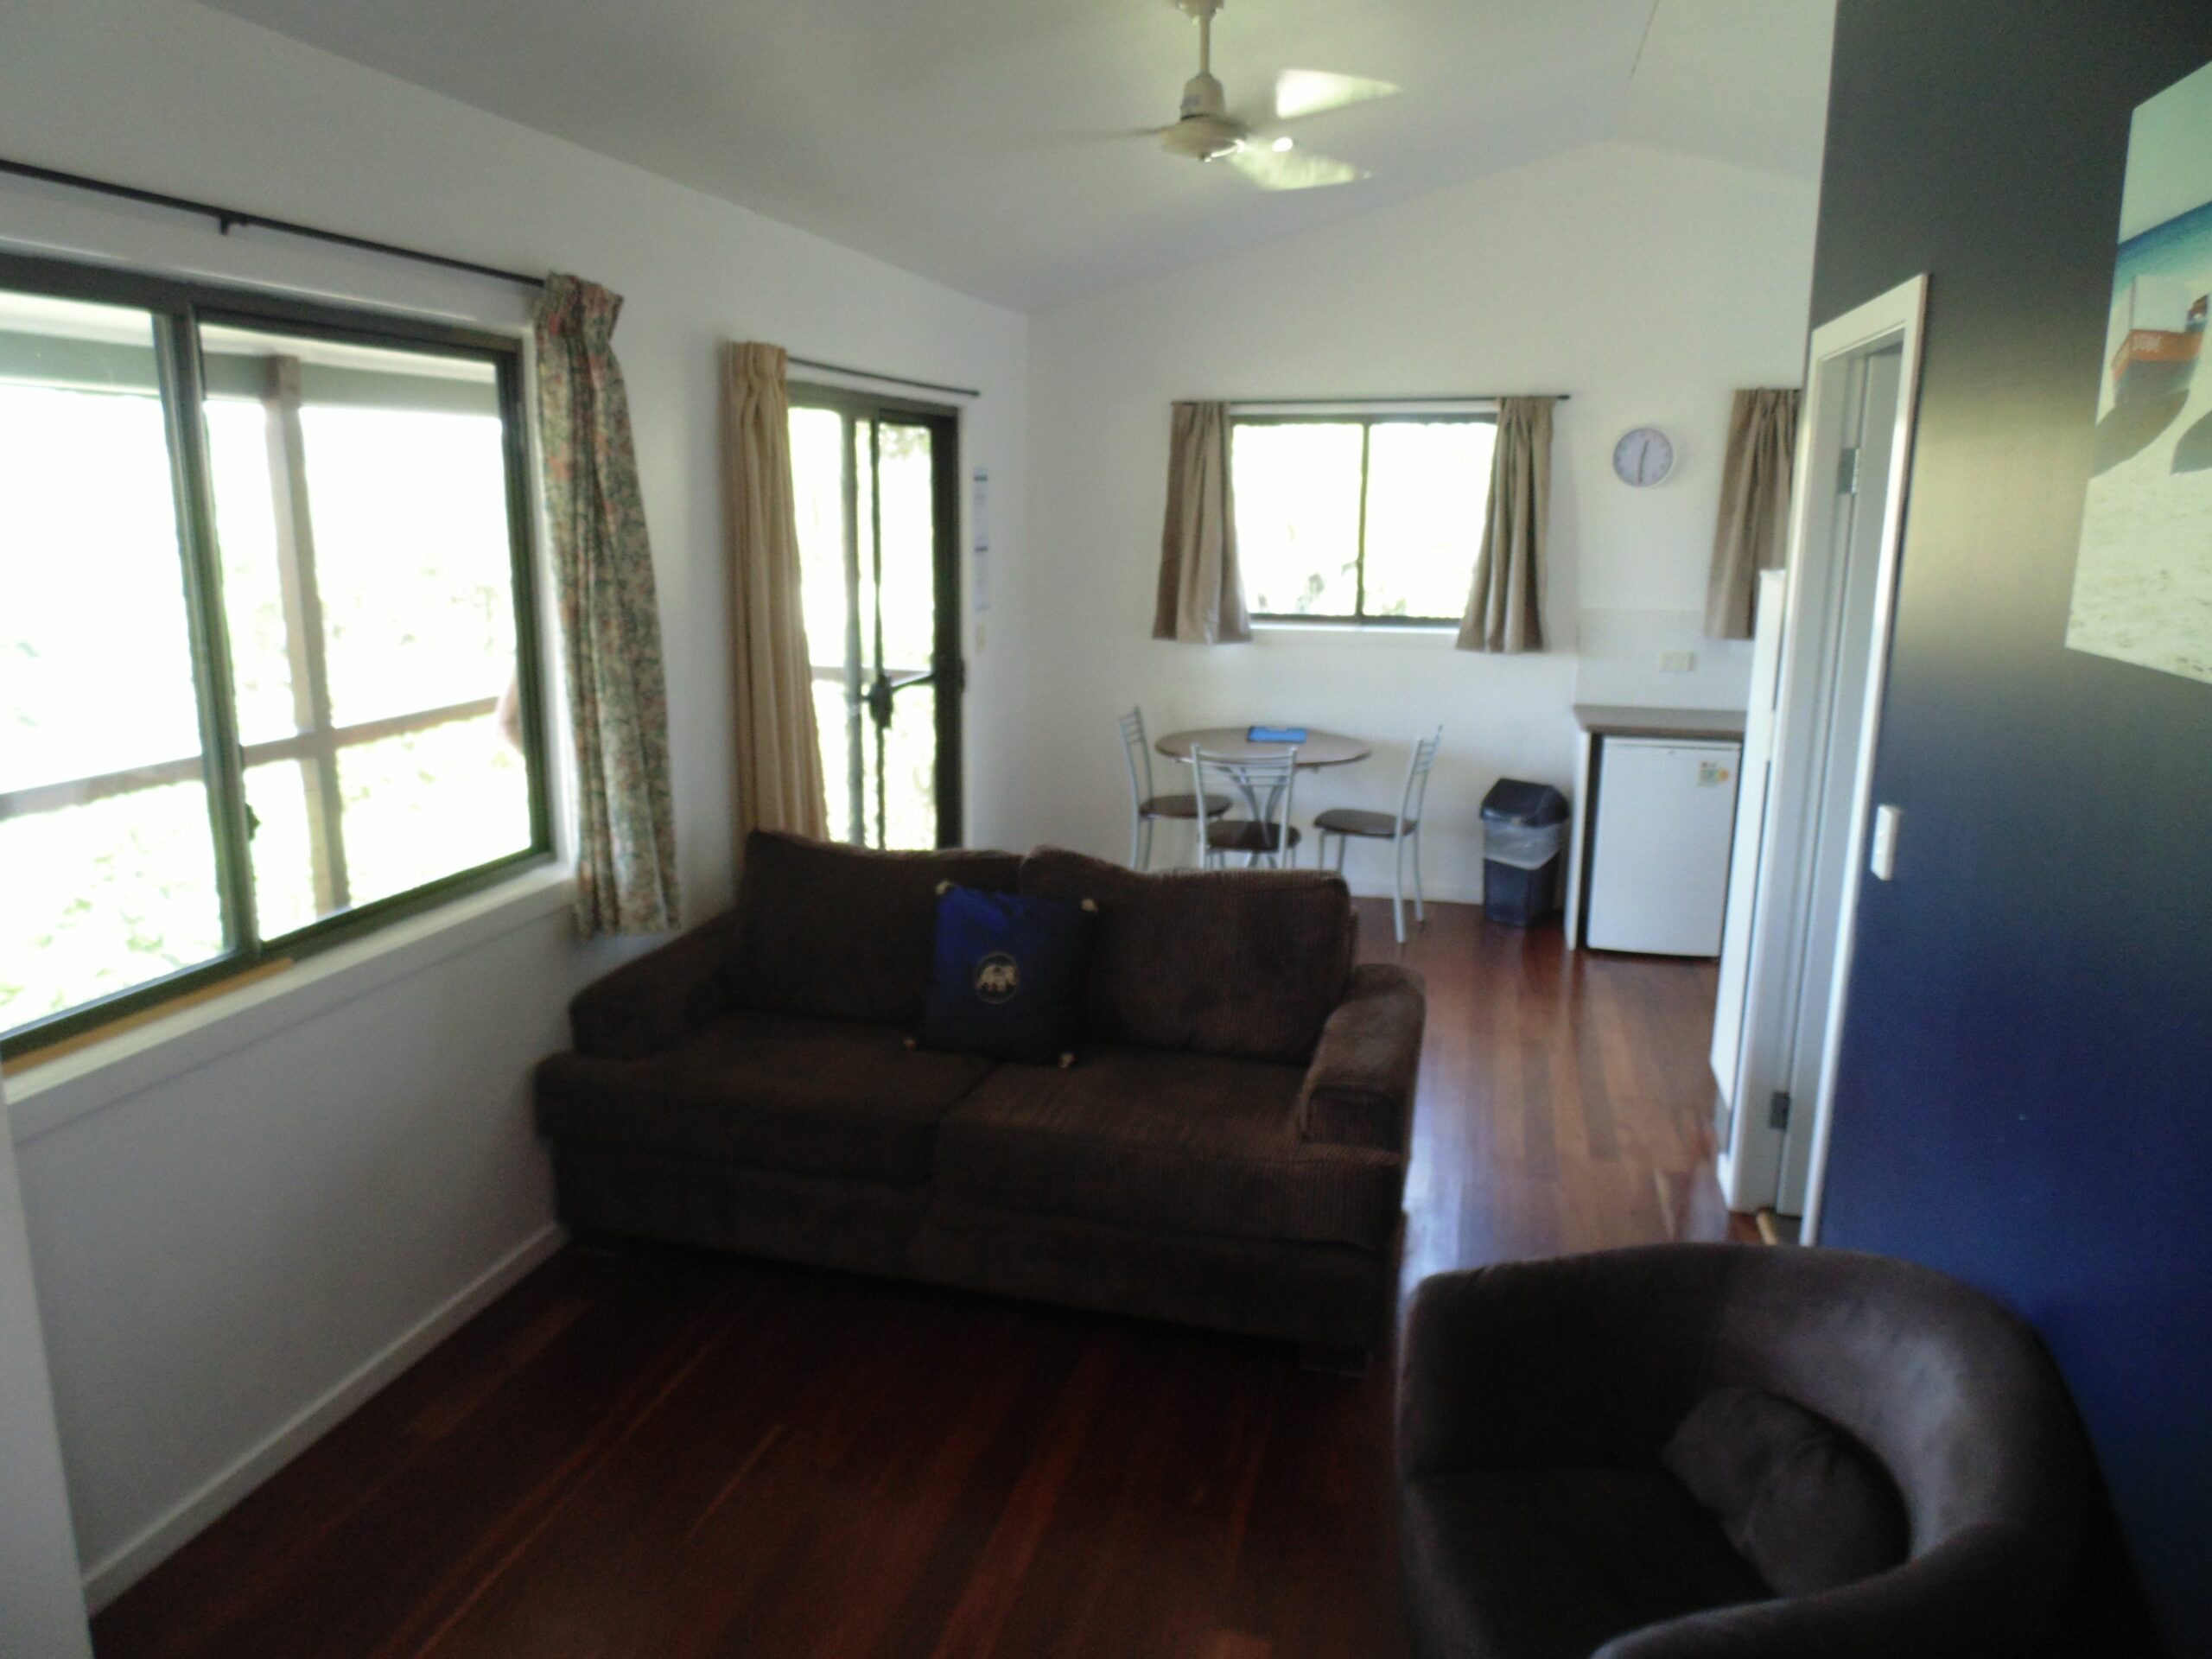 Alstonville Country Cottages